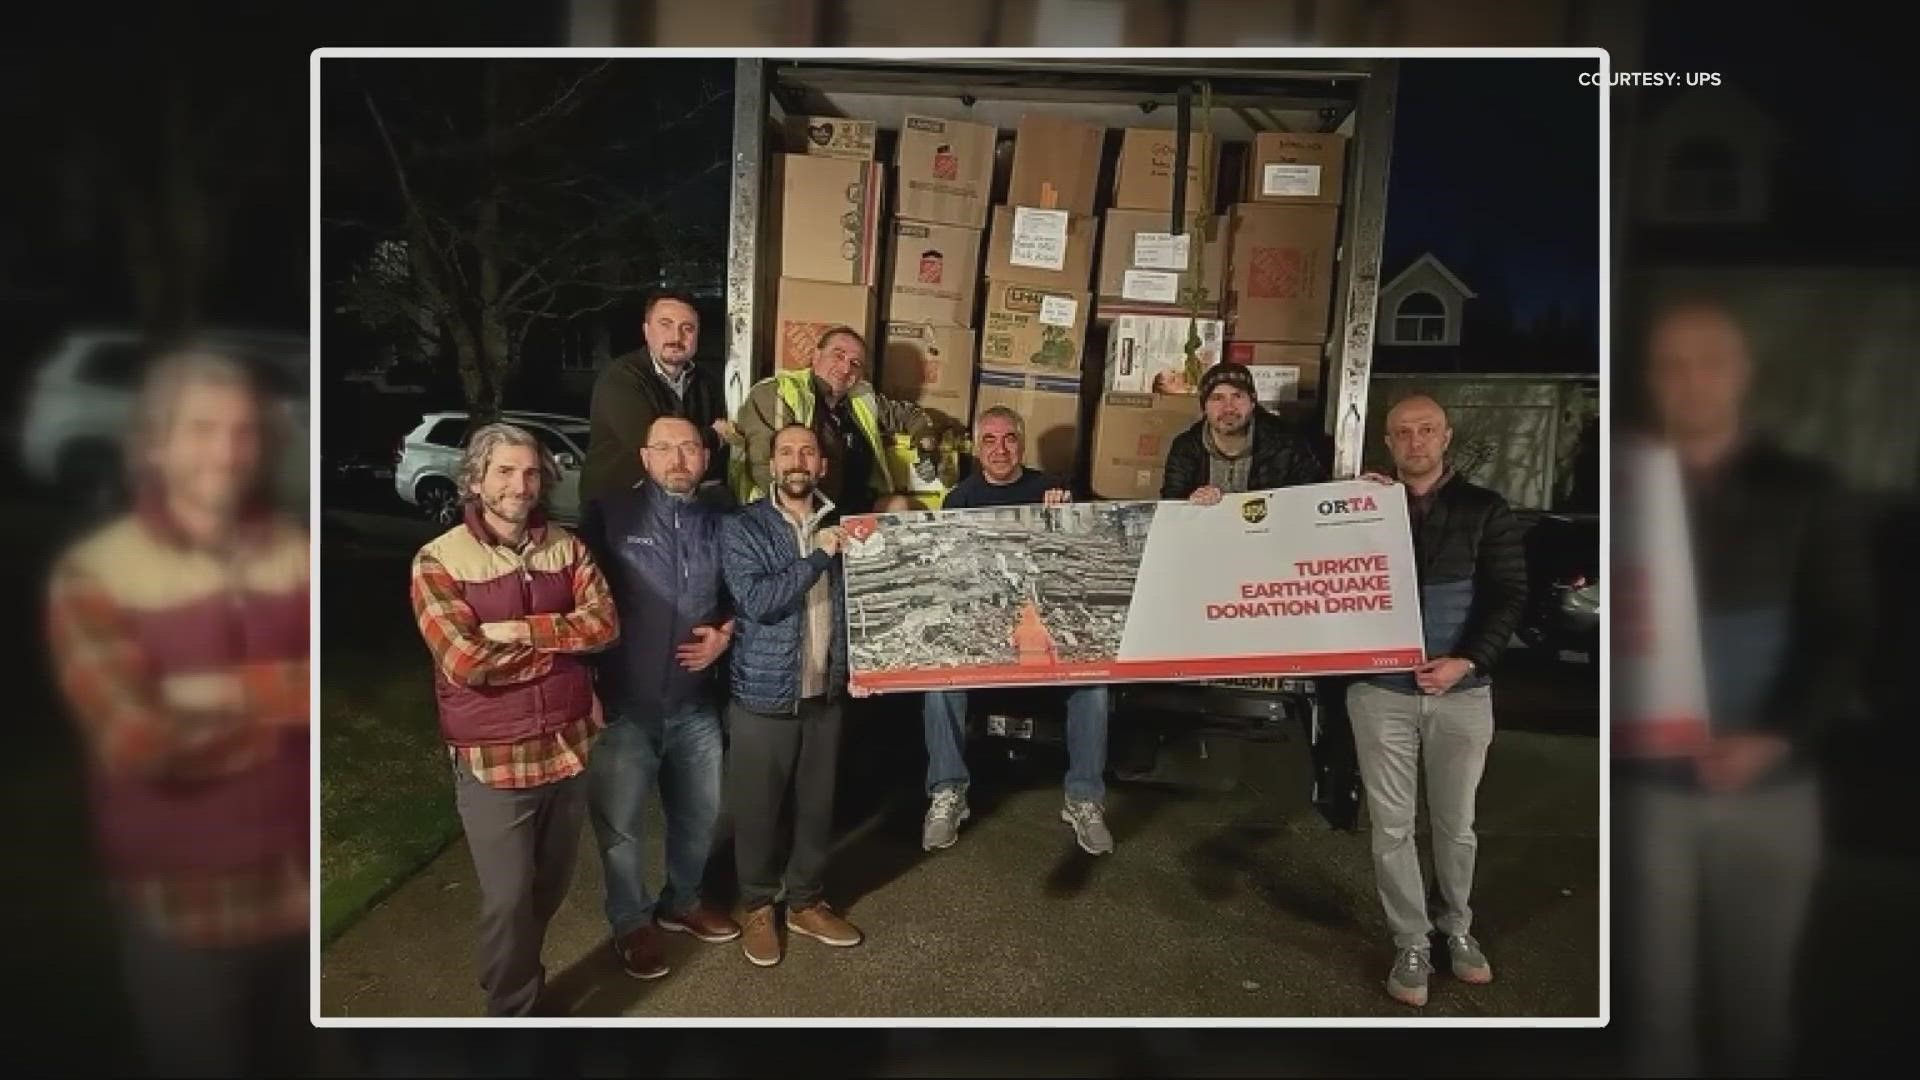 When supply drive volunteers needed to transport tons of donations to Seattle, Murat Yavuz drew upon his strengths and UPS support